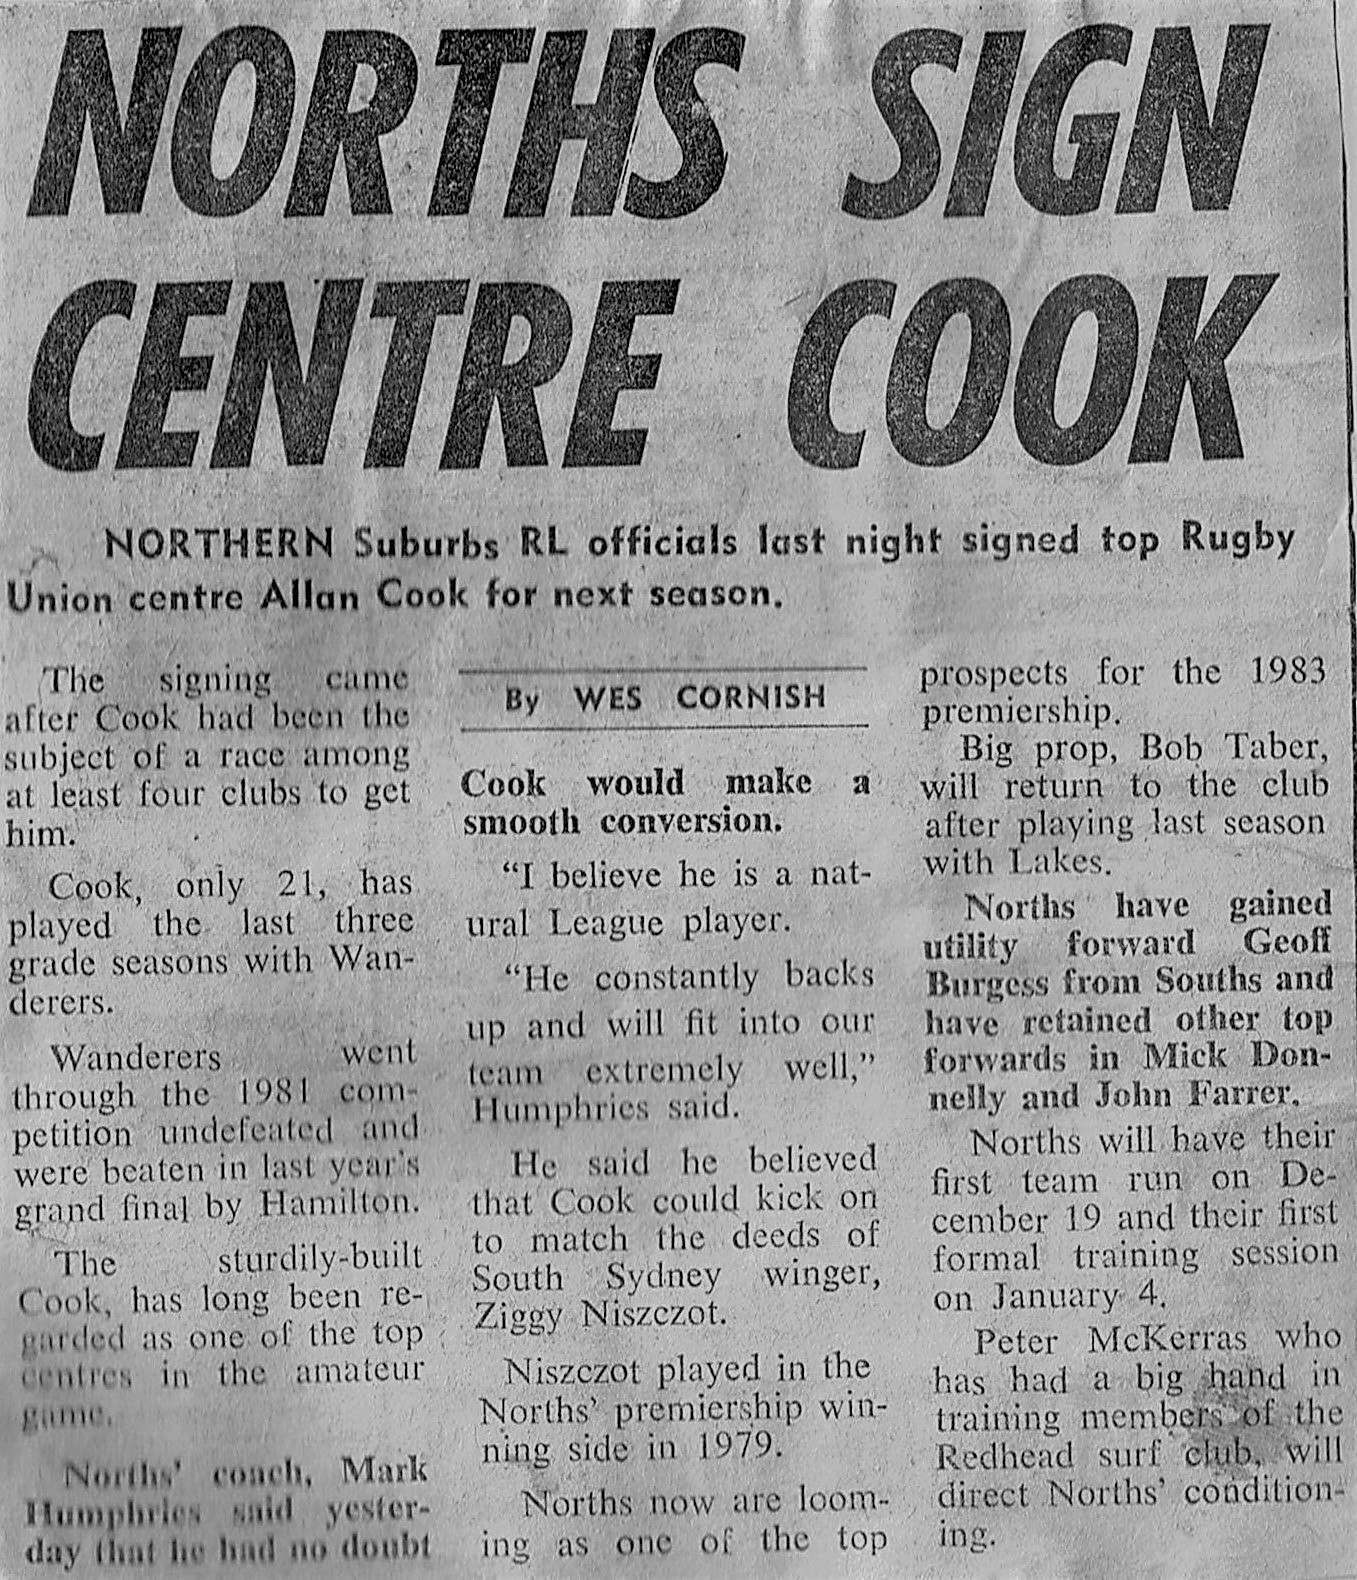 North sign Rugby Union Centre Allan Cook.